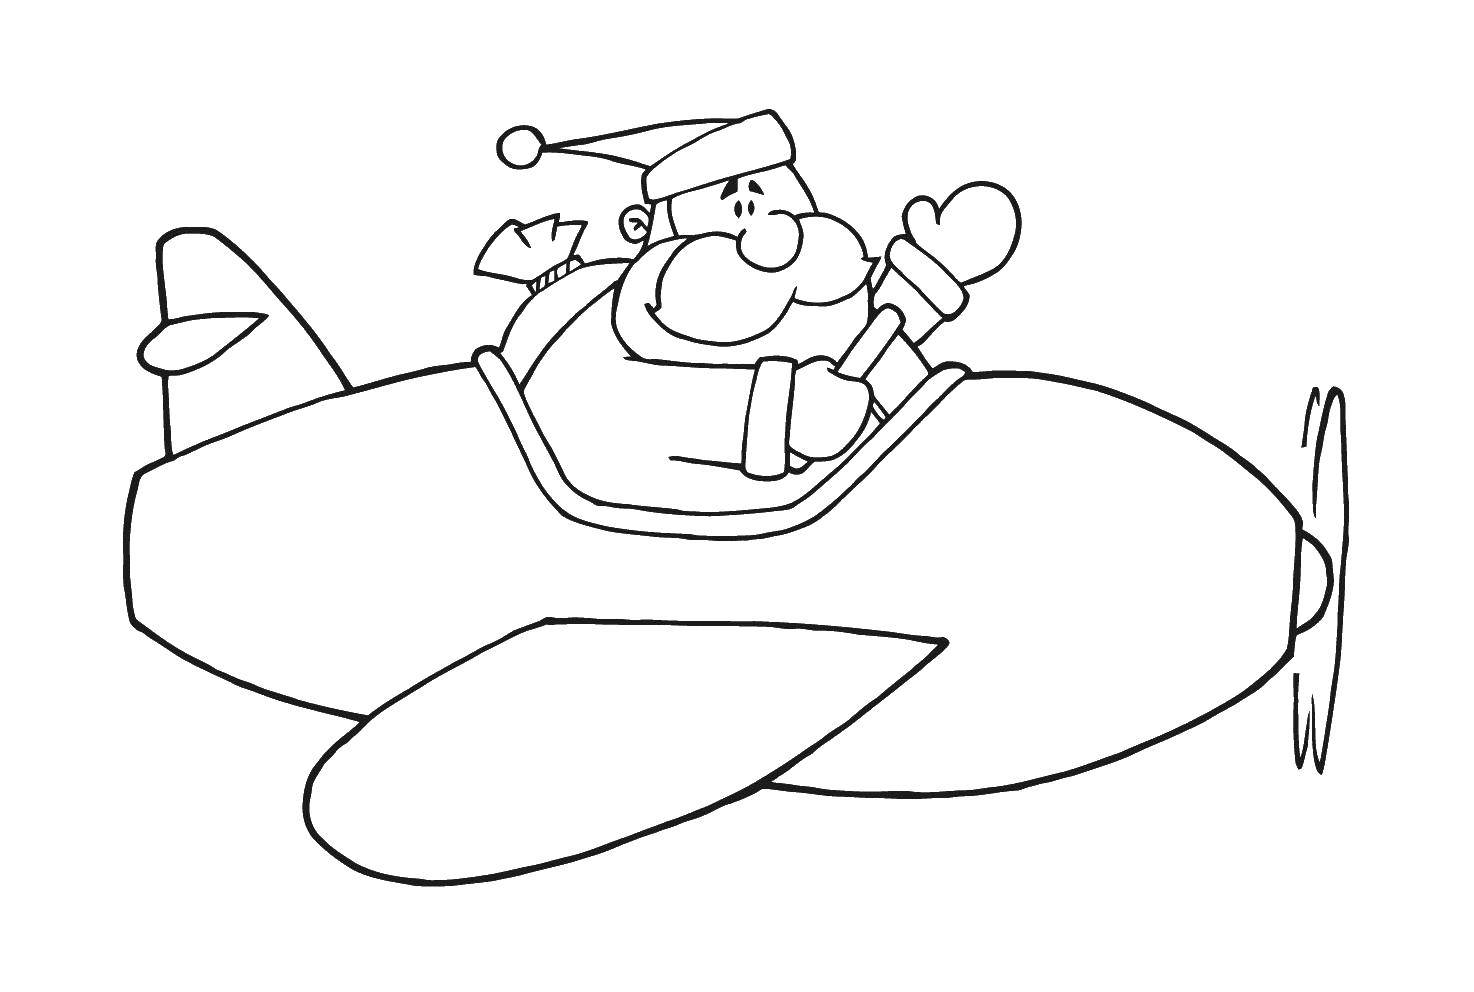 Coloring Santa Claus on the airplane. Category Music. Tags:  plane.